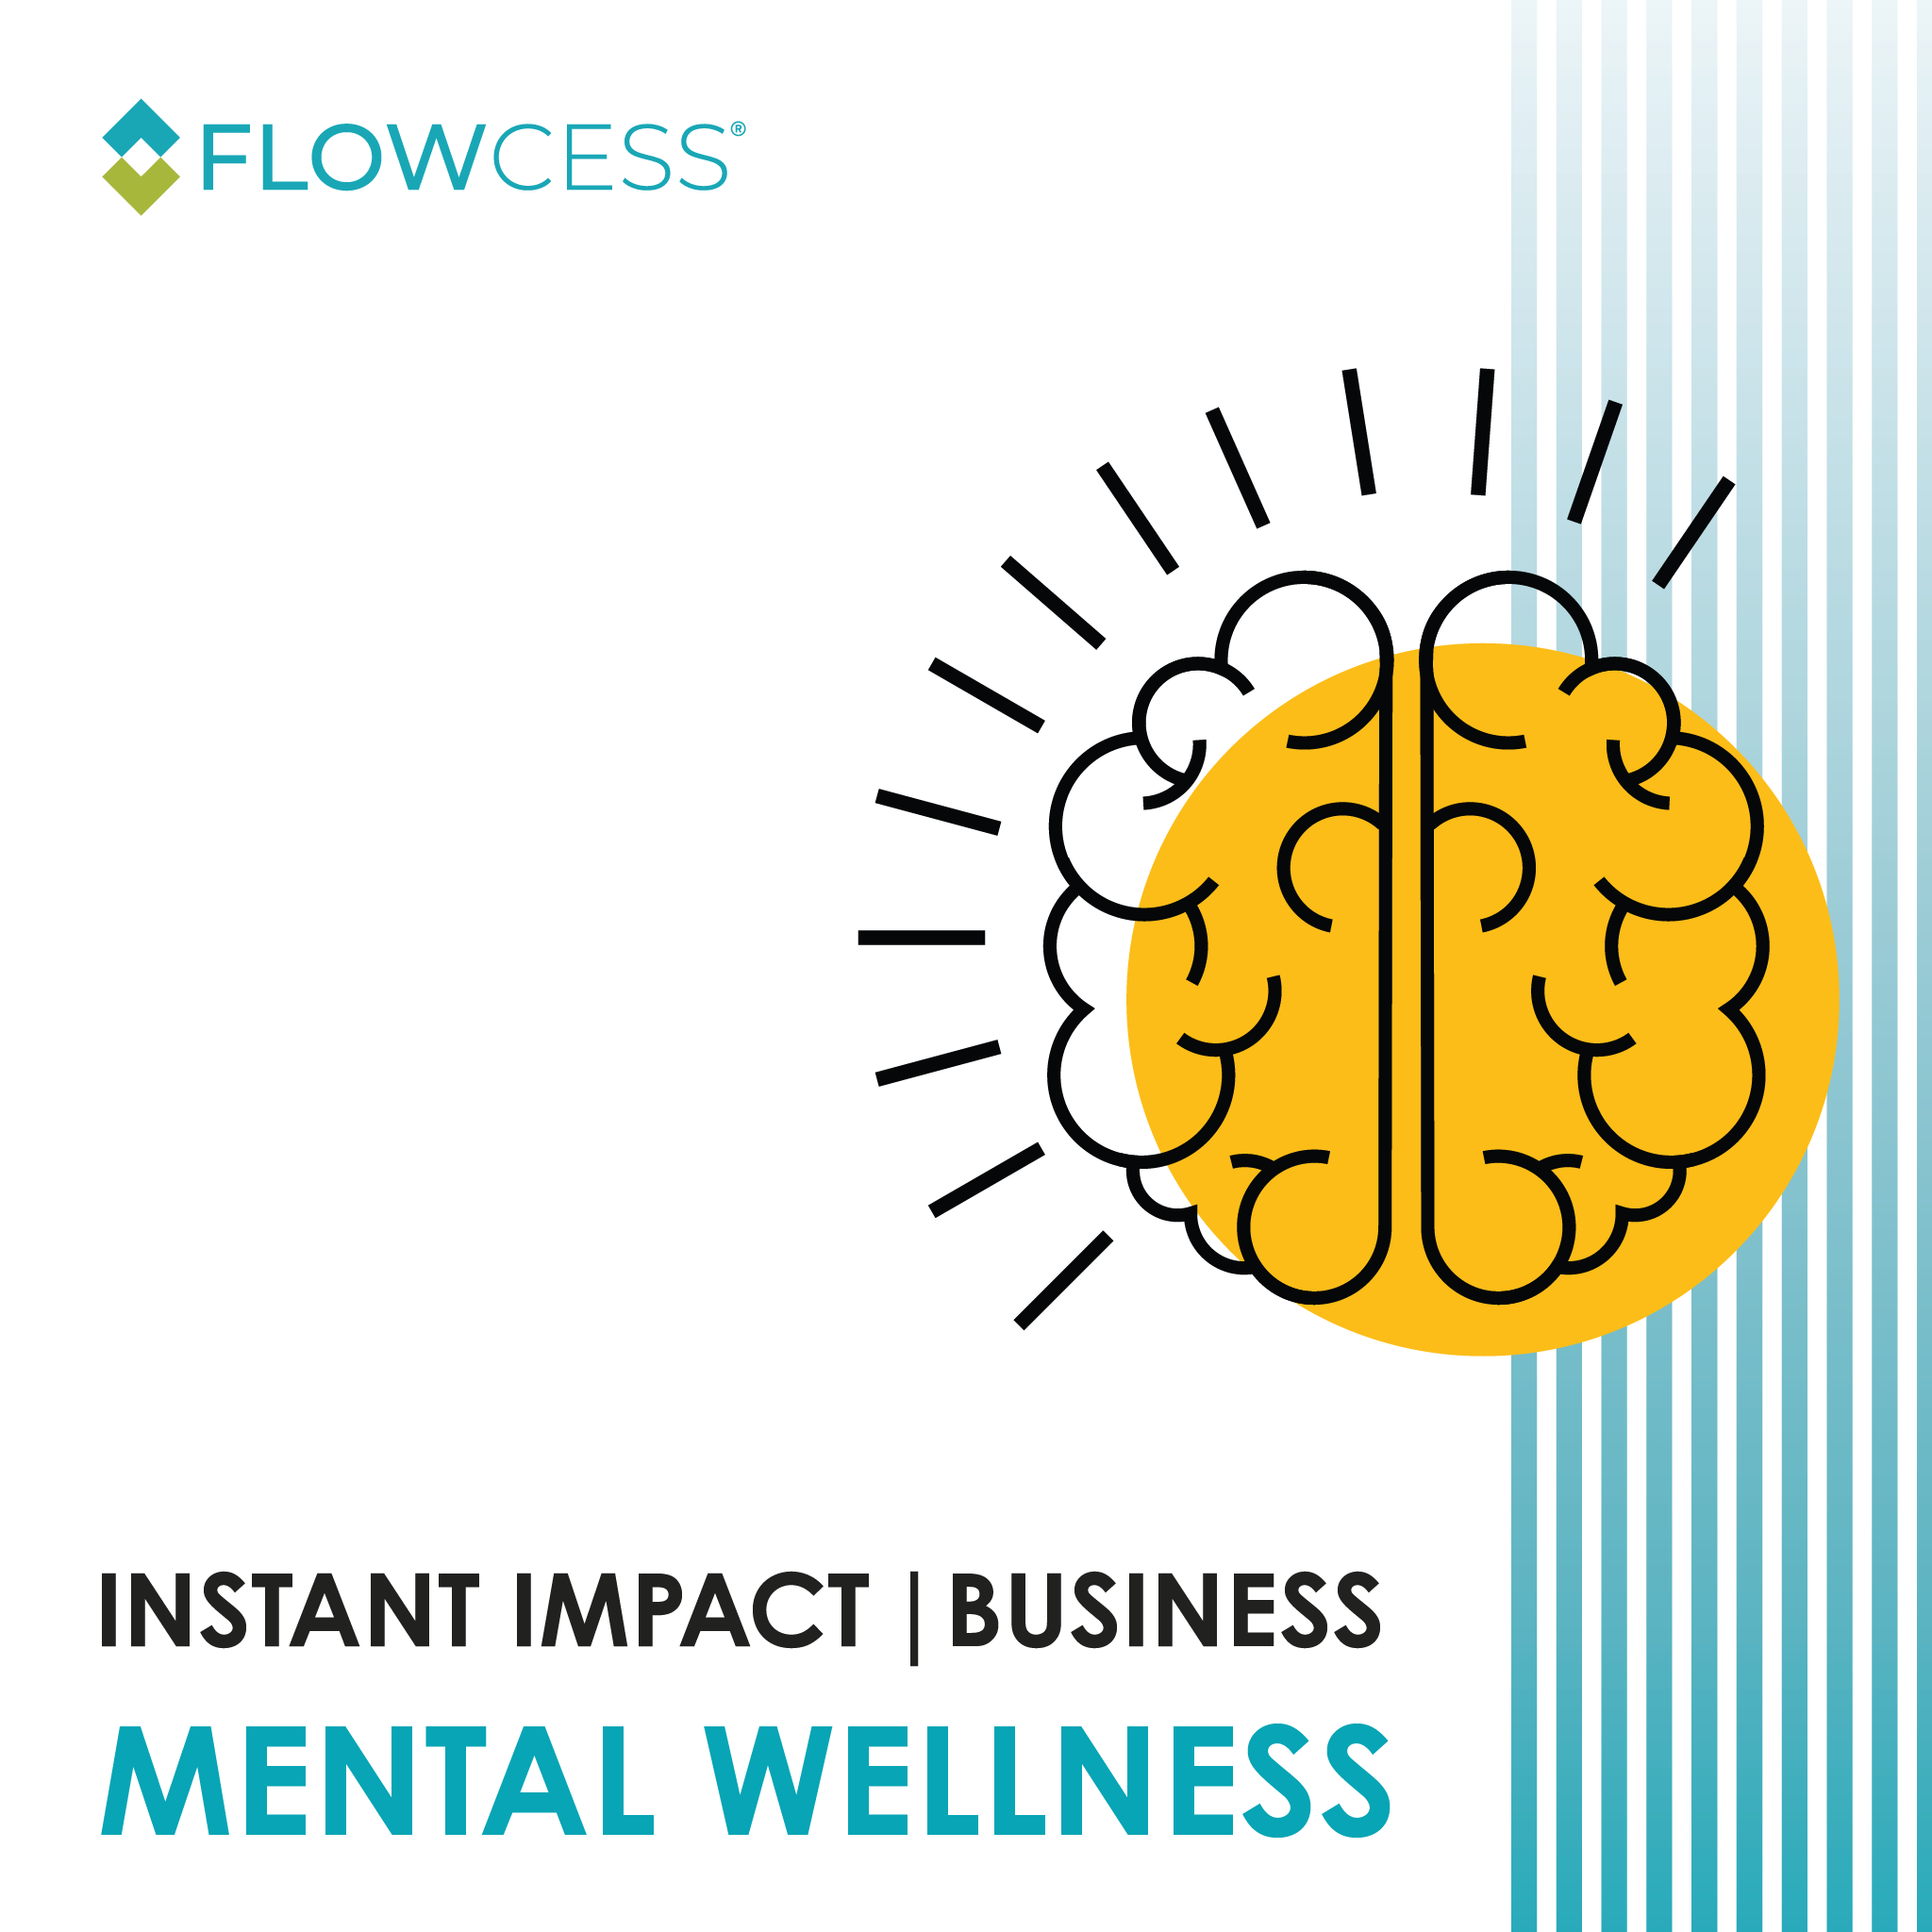 Instant Impact | Business - Mental Wellness